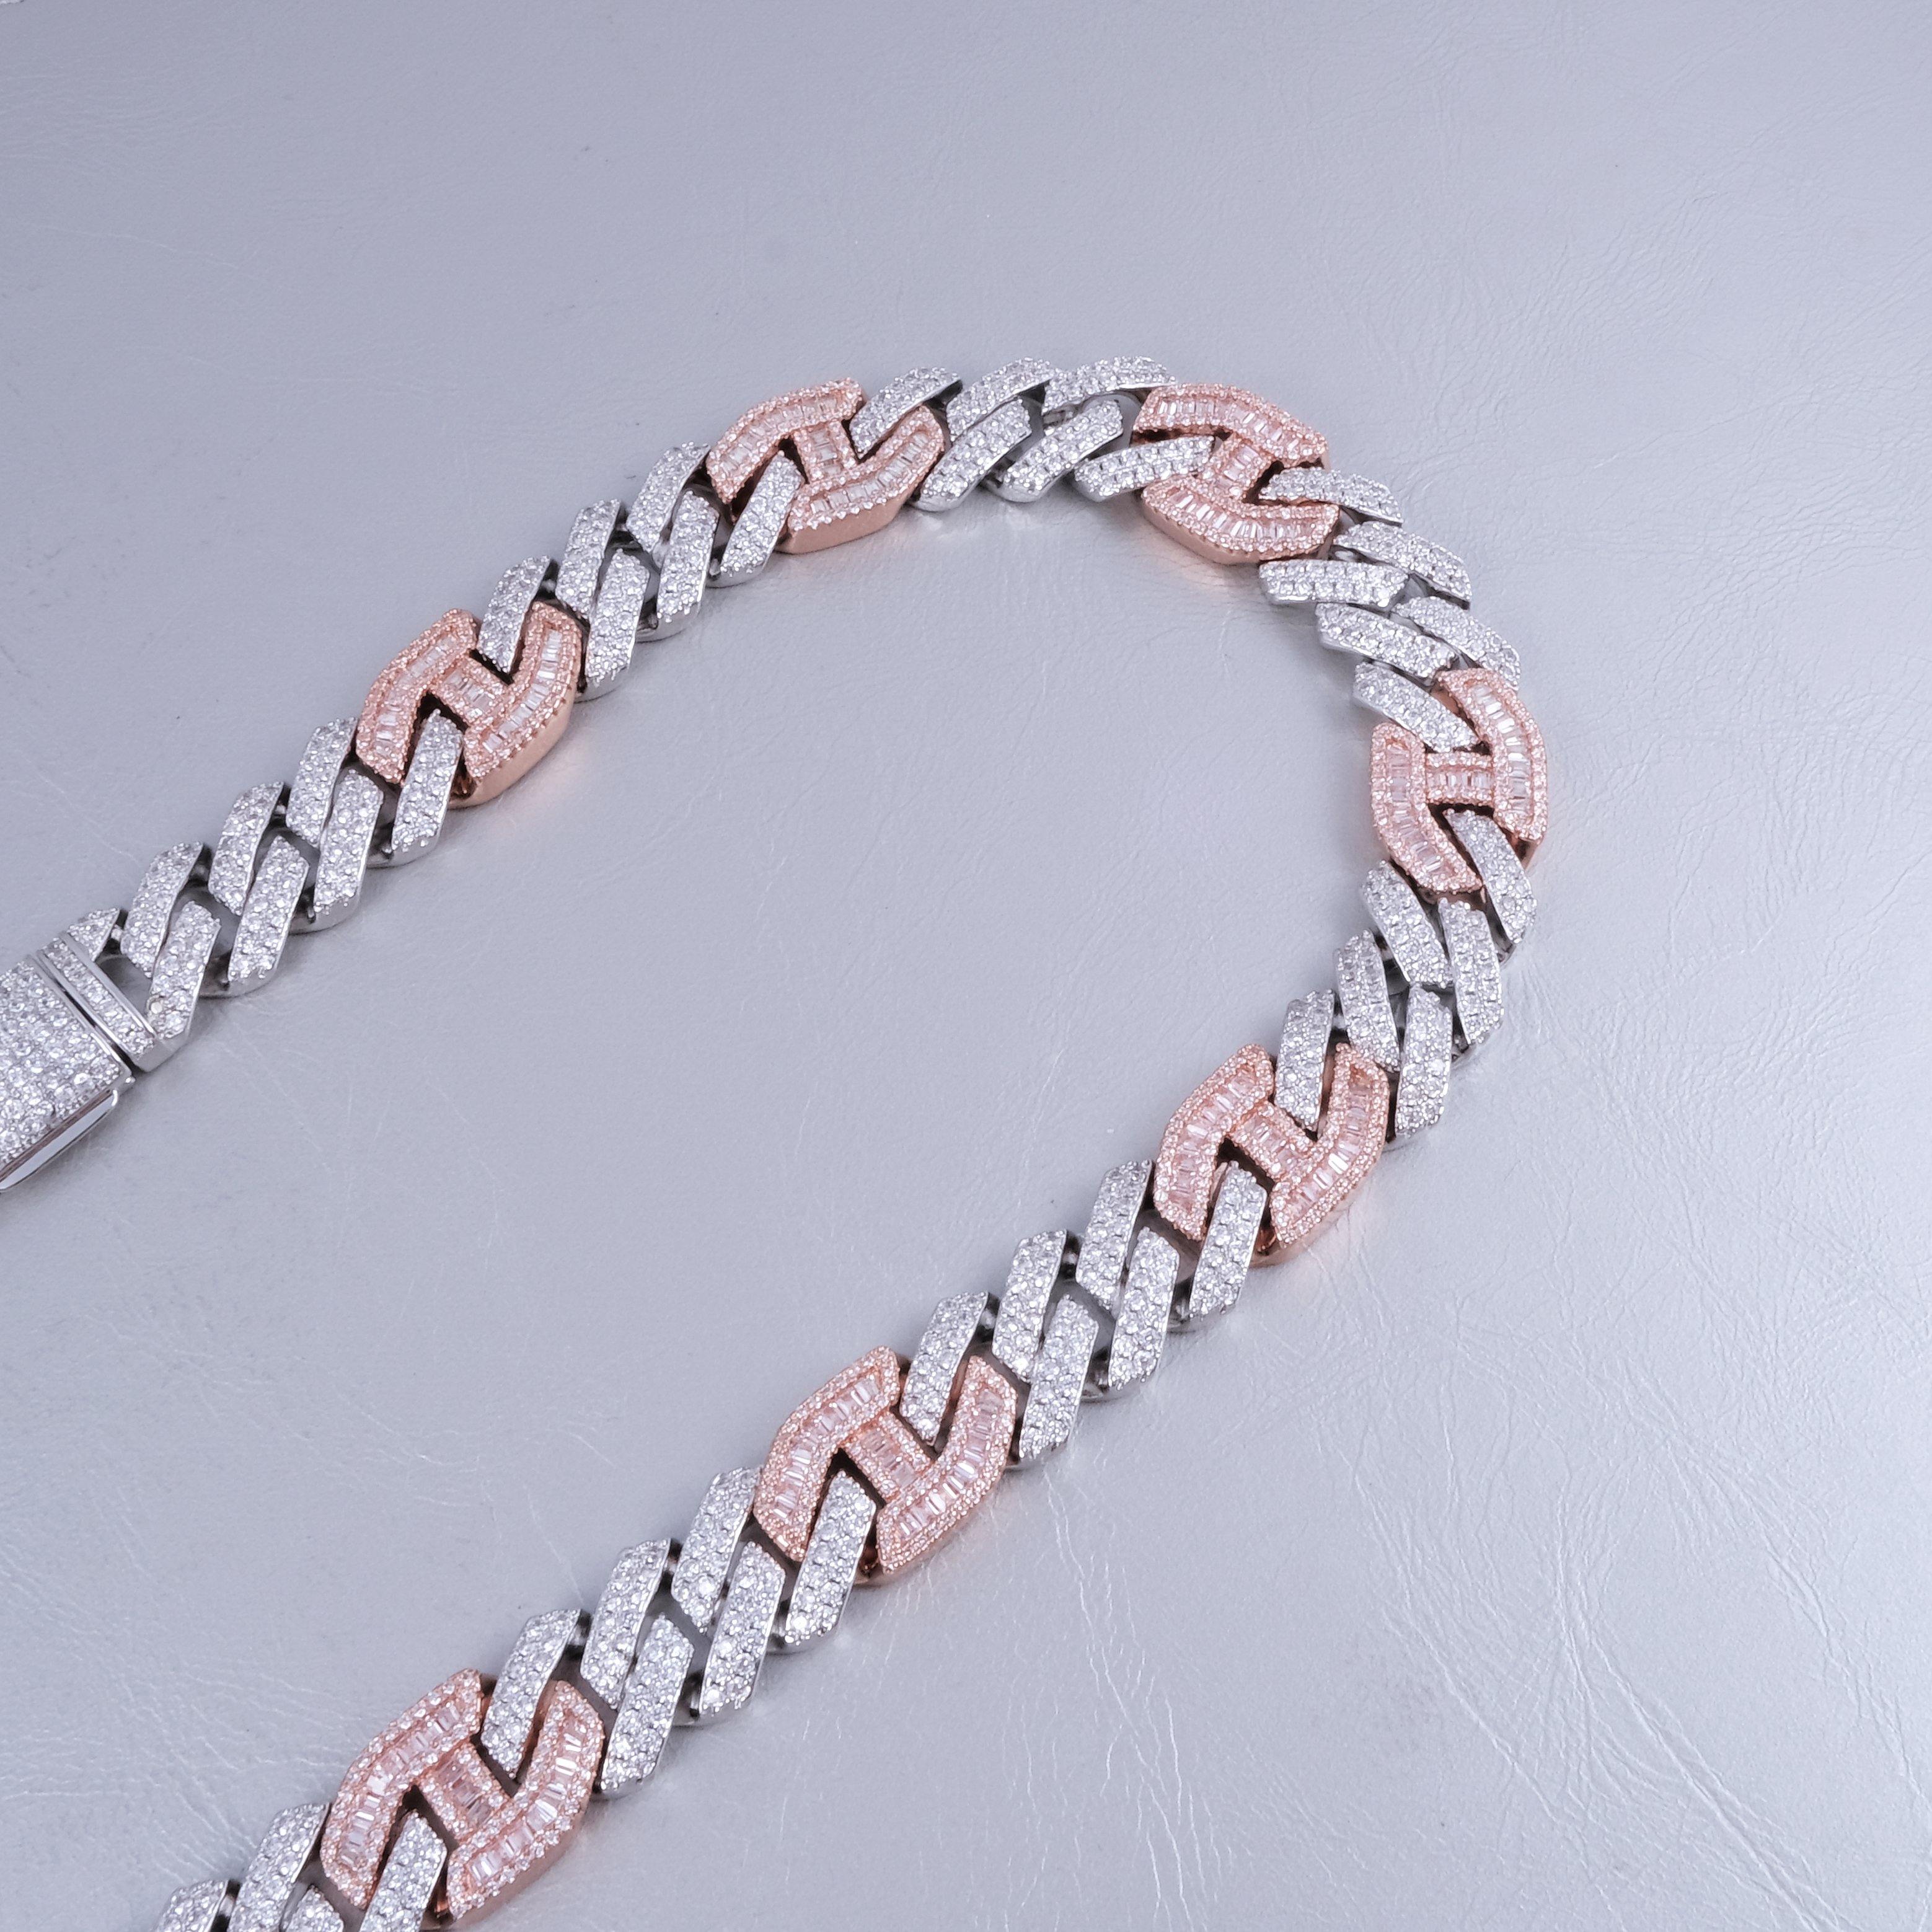 Iced Prong Link Choker (12mm) in White&Pink